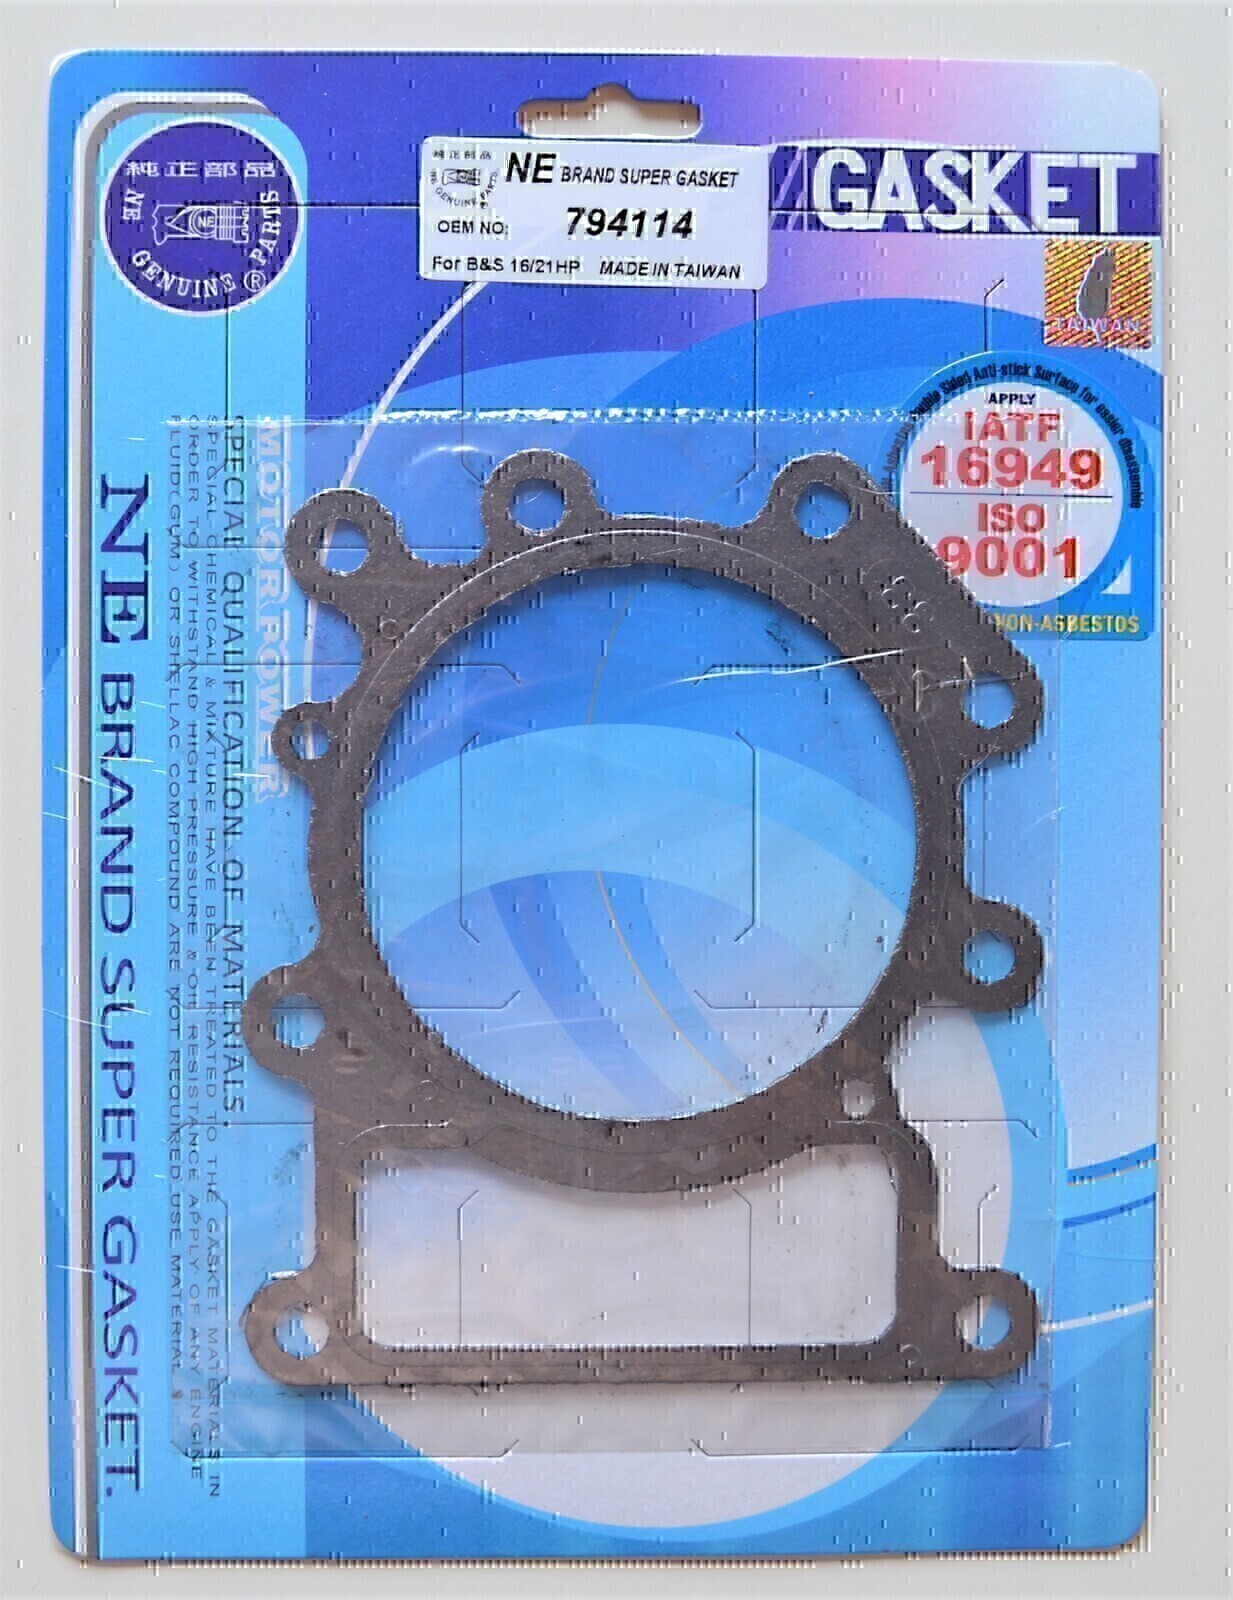 HEAD GASKET FOR BRIGGS & STRATTON 31 SERIES OHV ENGINES